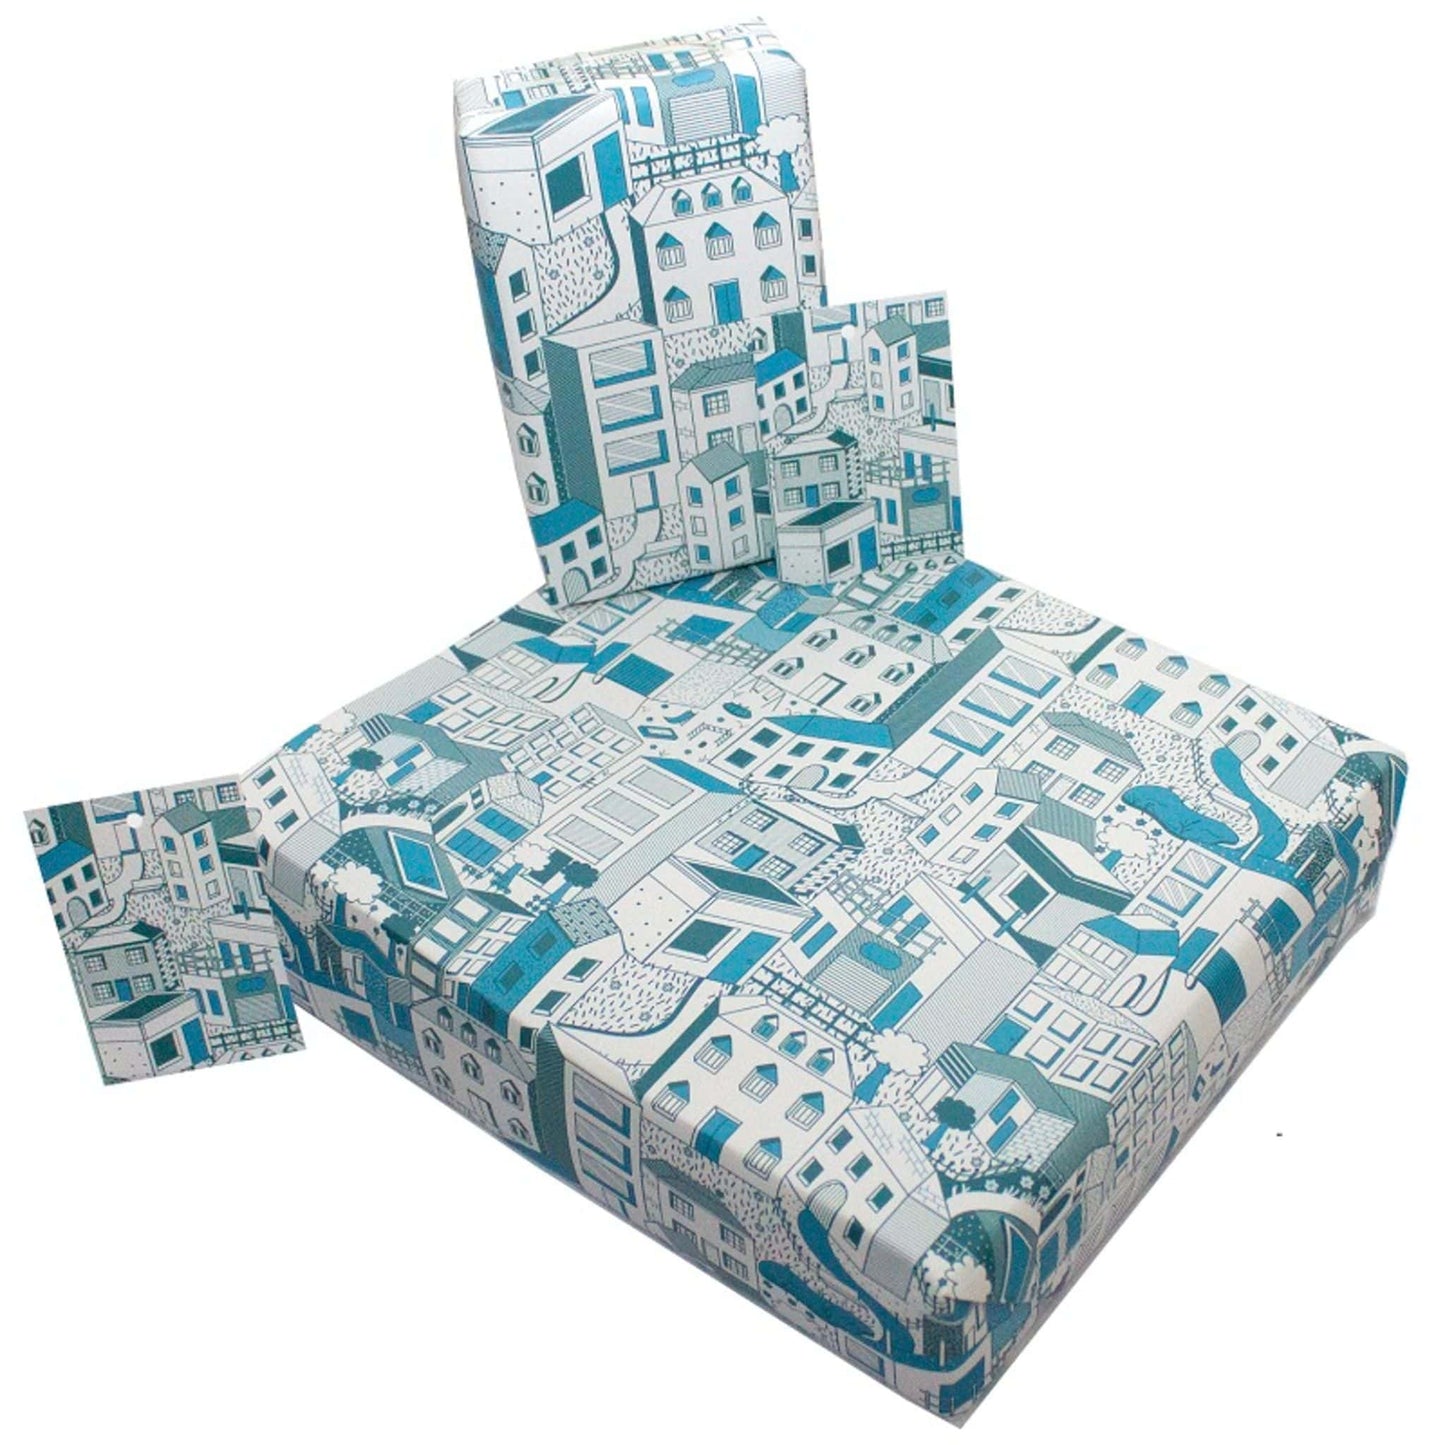 Buildings by Rosie Parkinson - eco-friendly recycled wrapping paper-min